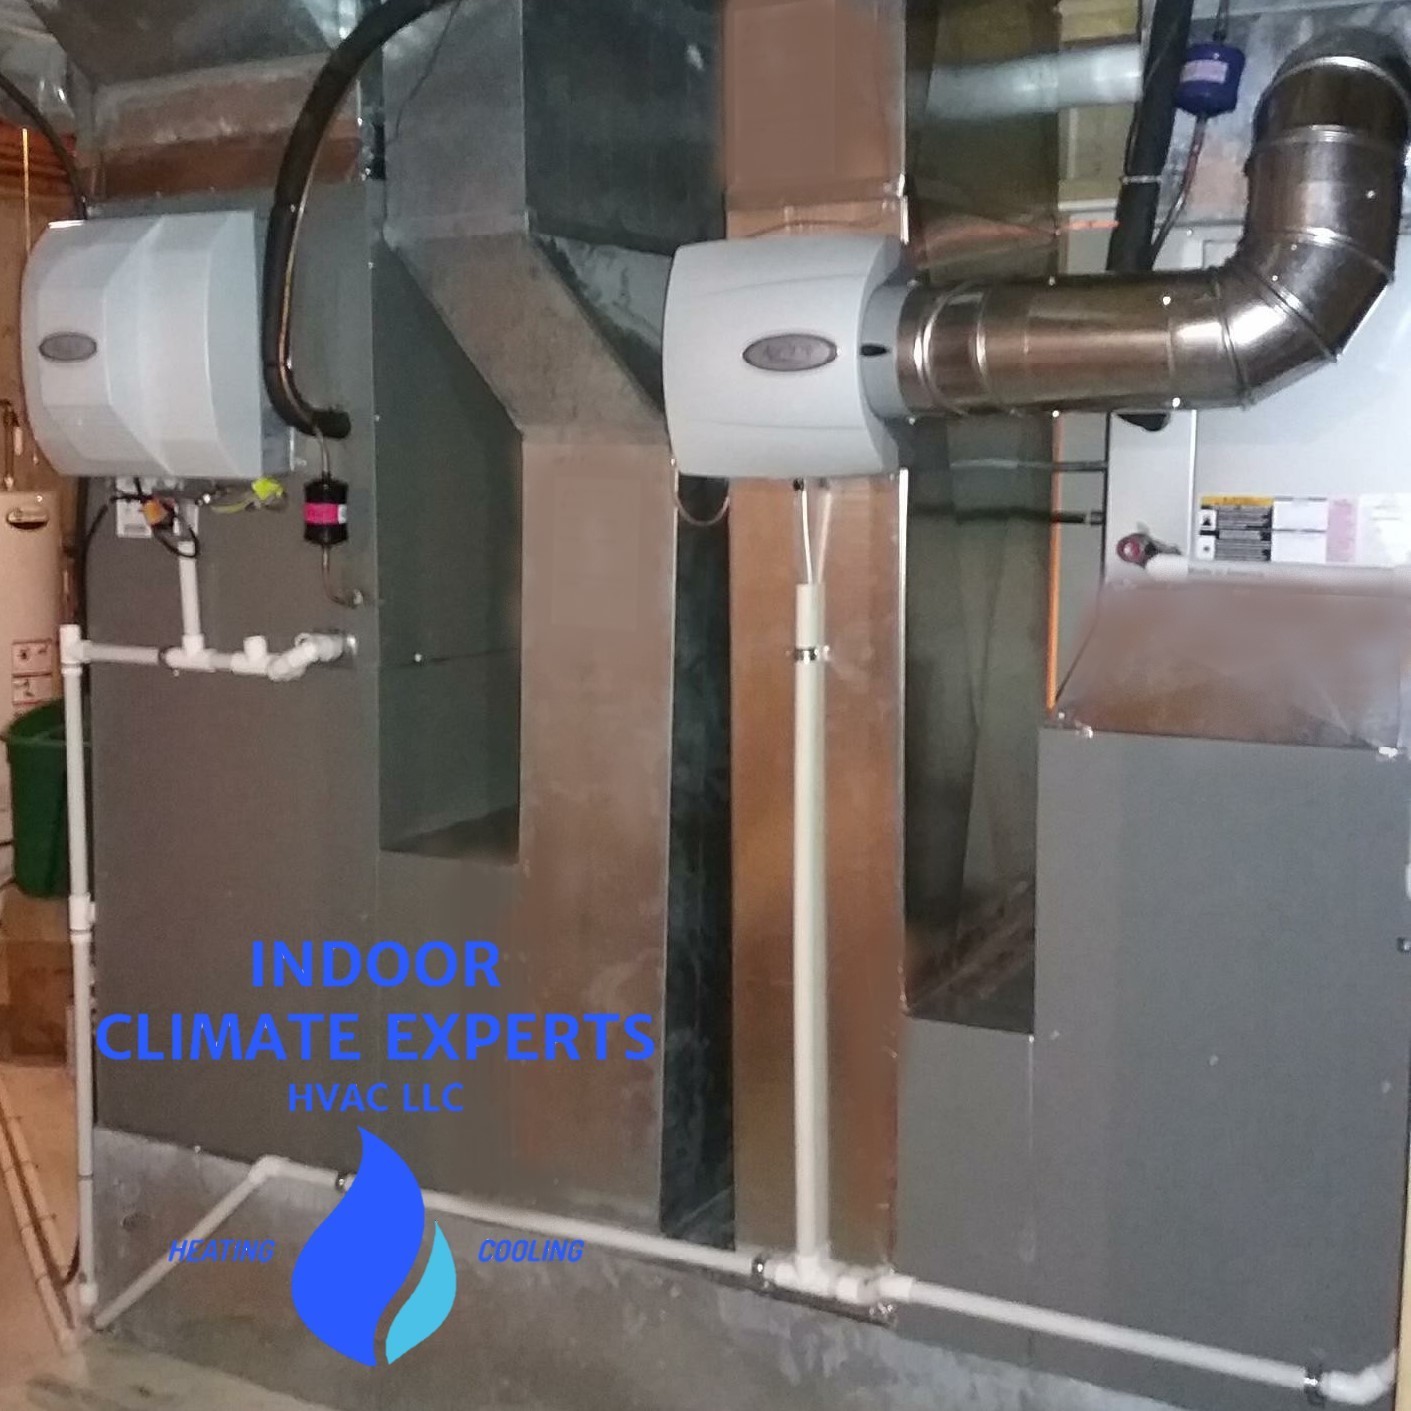 Indoor Climate Experts HVAC Photo